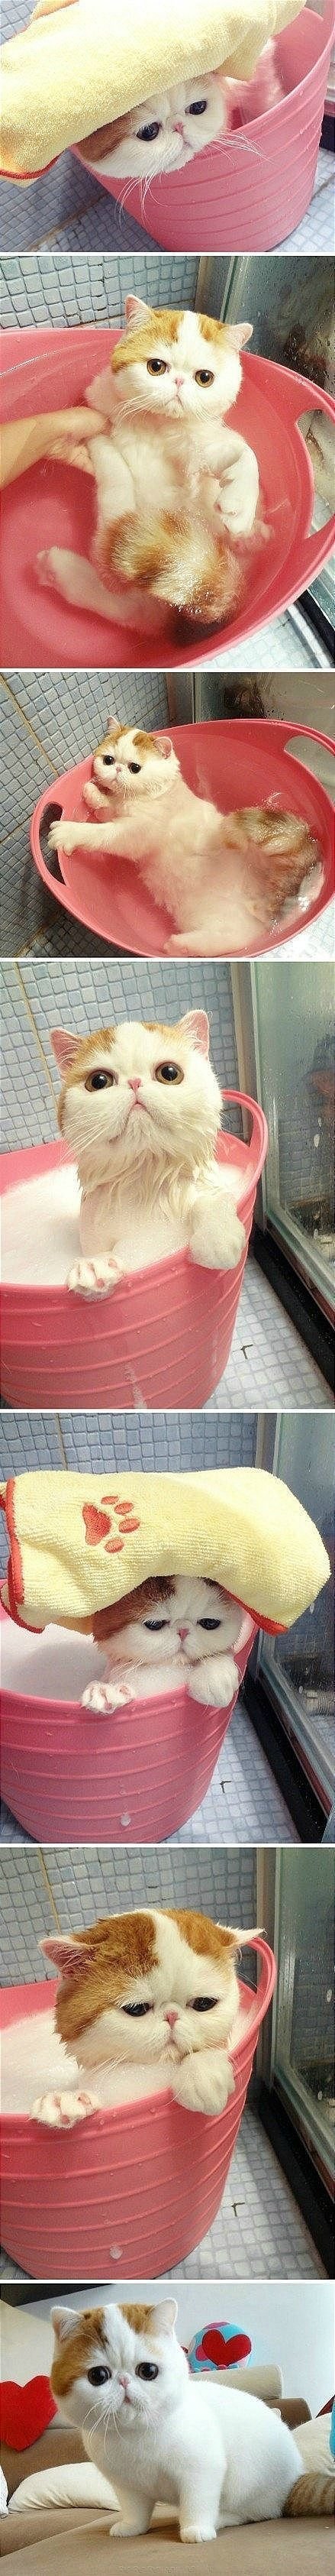 Bath time with kitty.